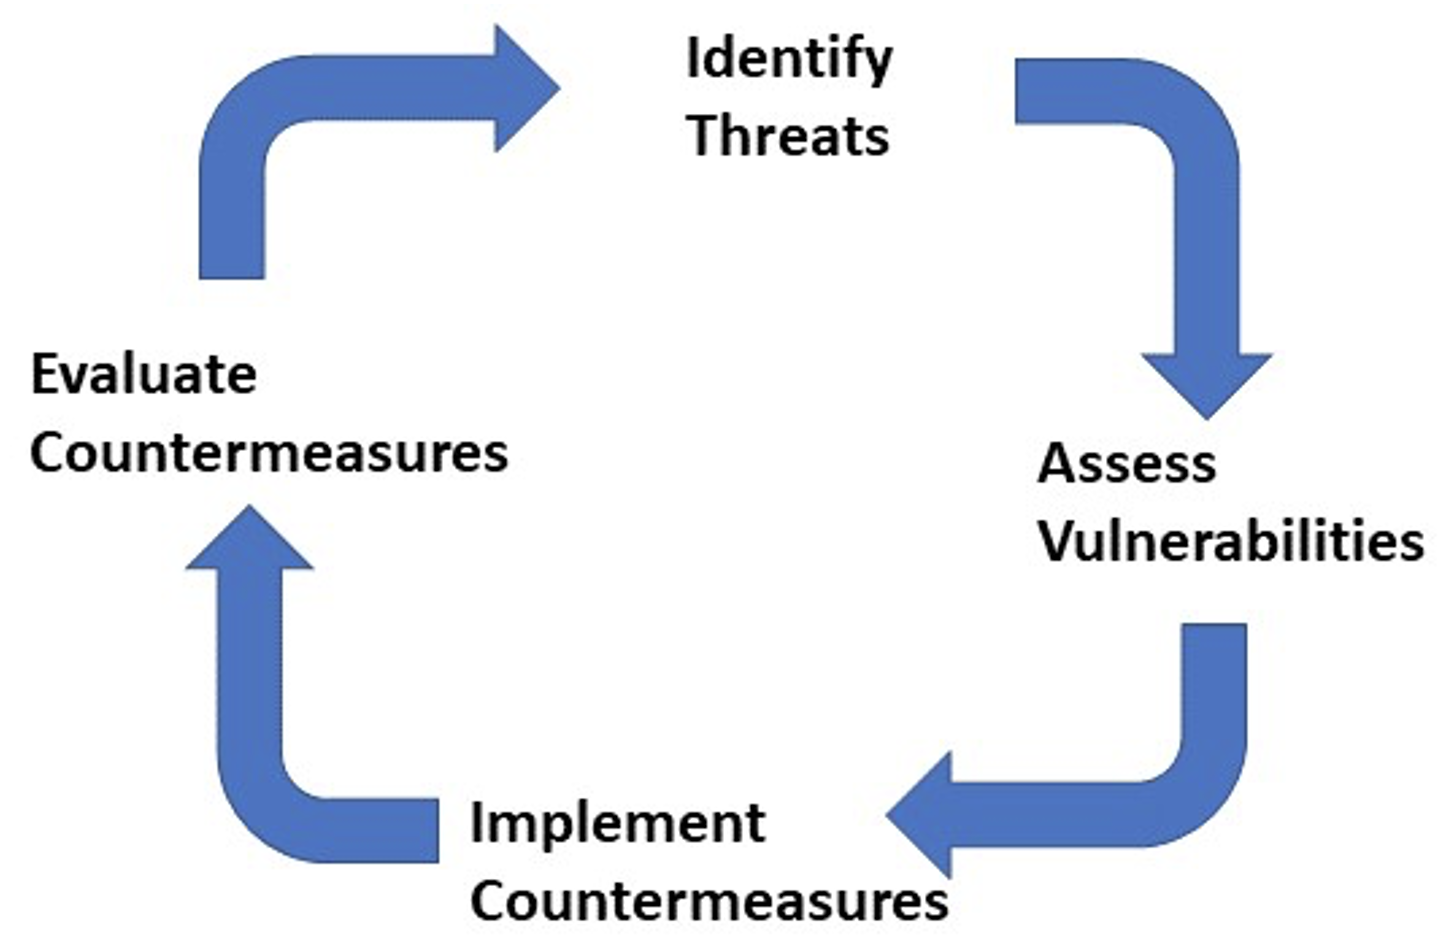 A diagram describing a cycle of four stages. The first stage is at the top of the diagram. It is labelled Identify Threats. A large arrow flows out from the right hand side of the top stage, down to the second stage, at the right of the diagram. The second stage is labelled Assess Vulnerabilities. A large arrow flows out from the second stage down to the third stage, at the bottom of the diagram. The third stage is labelled Implement Countermeasures. A large arrow flows out from the third stage up to the fourth and final stage, at the left of the diagram. The fourth and final stage is labelled Evaluate Countermeasures. A large arrow flows out from the fourth and final stage up to the first stage again, at the top of the diagram.